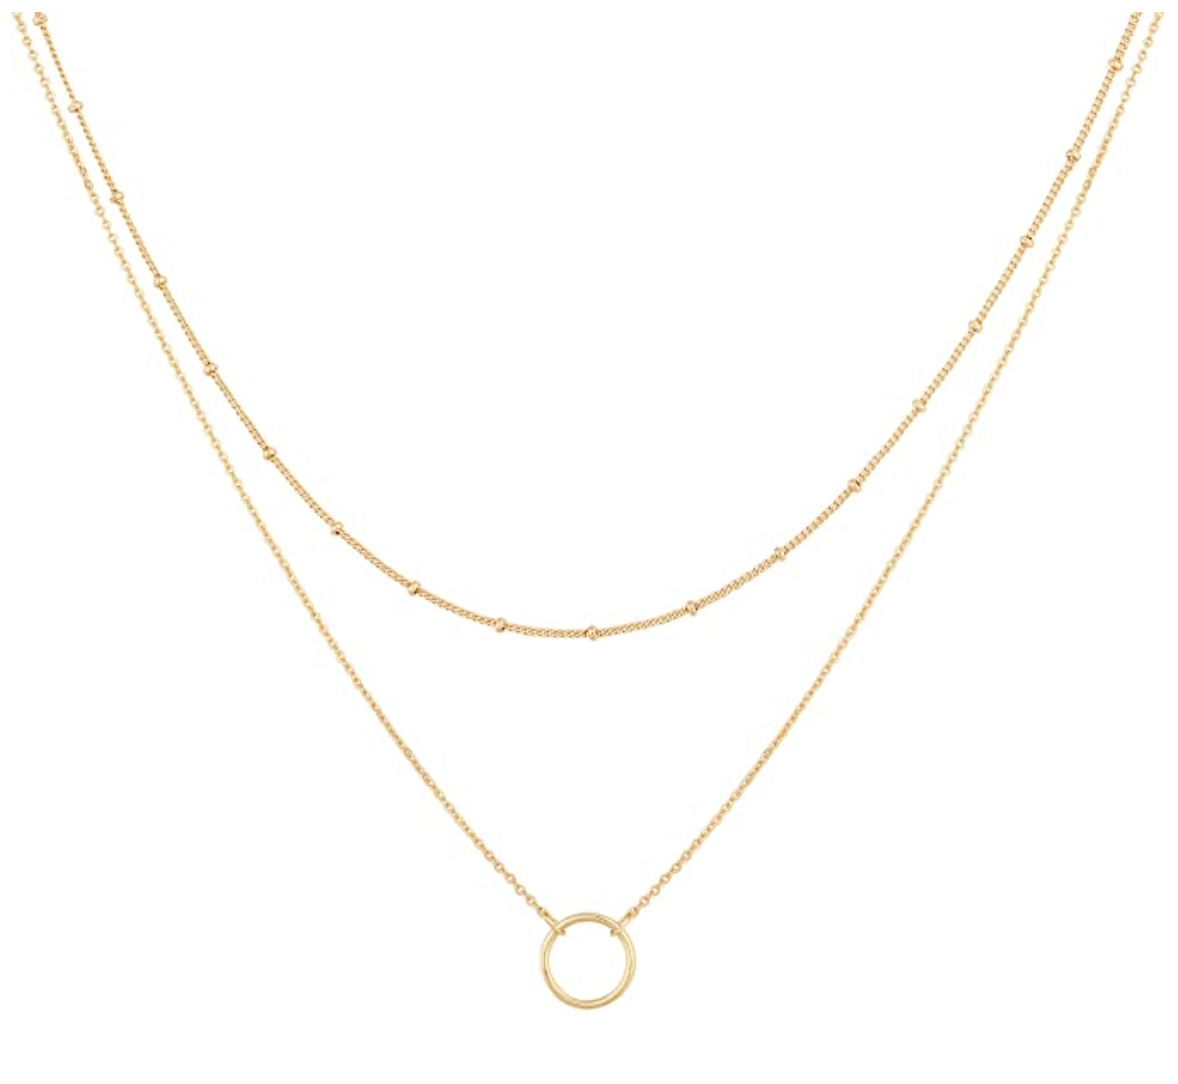 MEVECCO Layered Heart Necklace Pendant Handmade 18k Gold Plated 